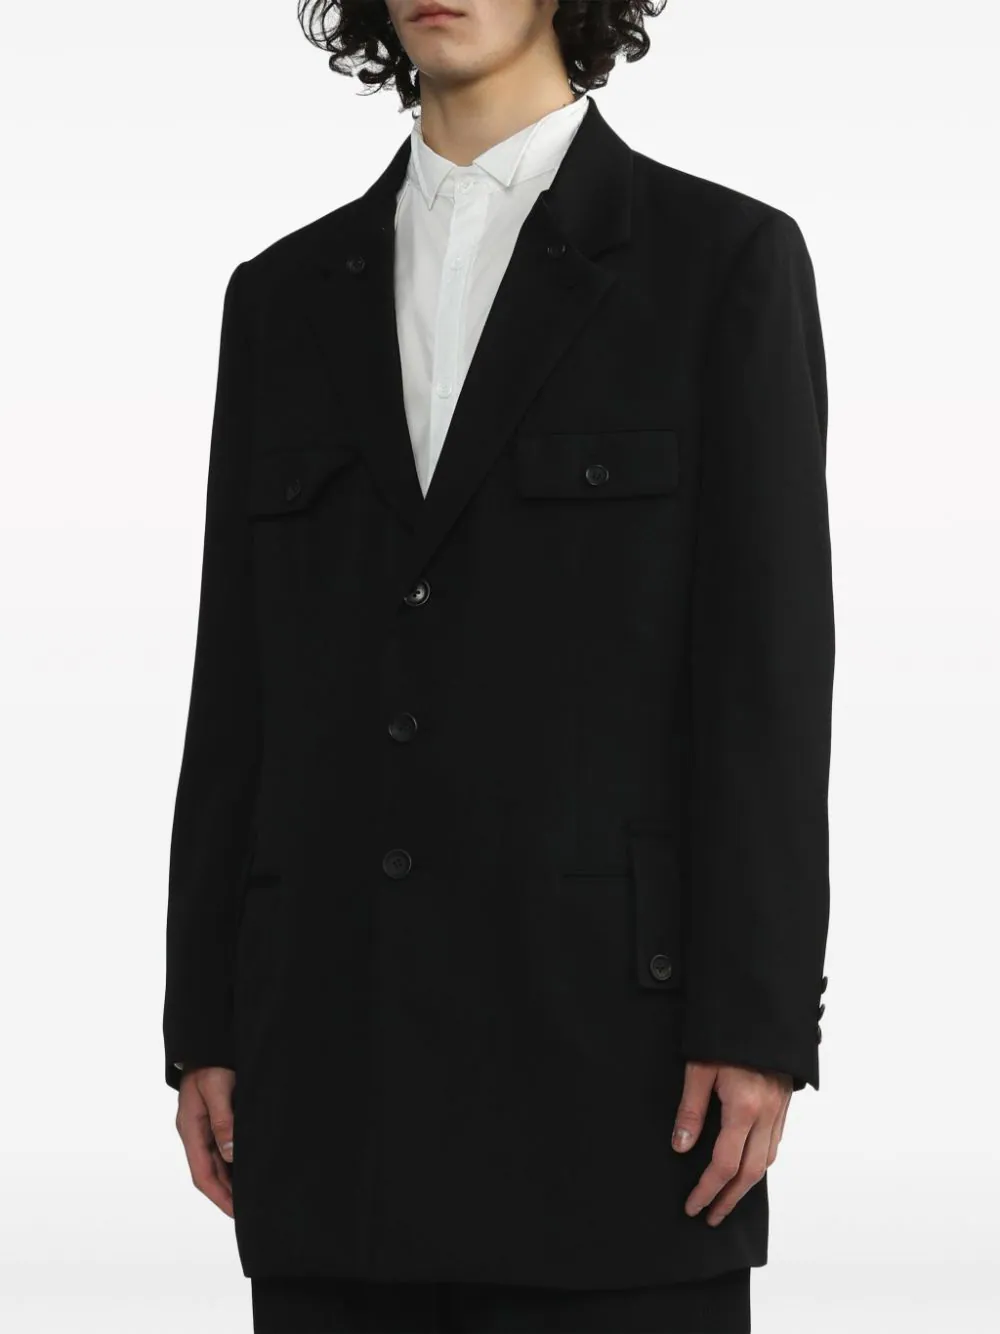 YOHJI YAMAMOTO POUR HOMME Double Collar 3-Button Single Breasted